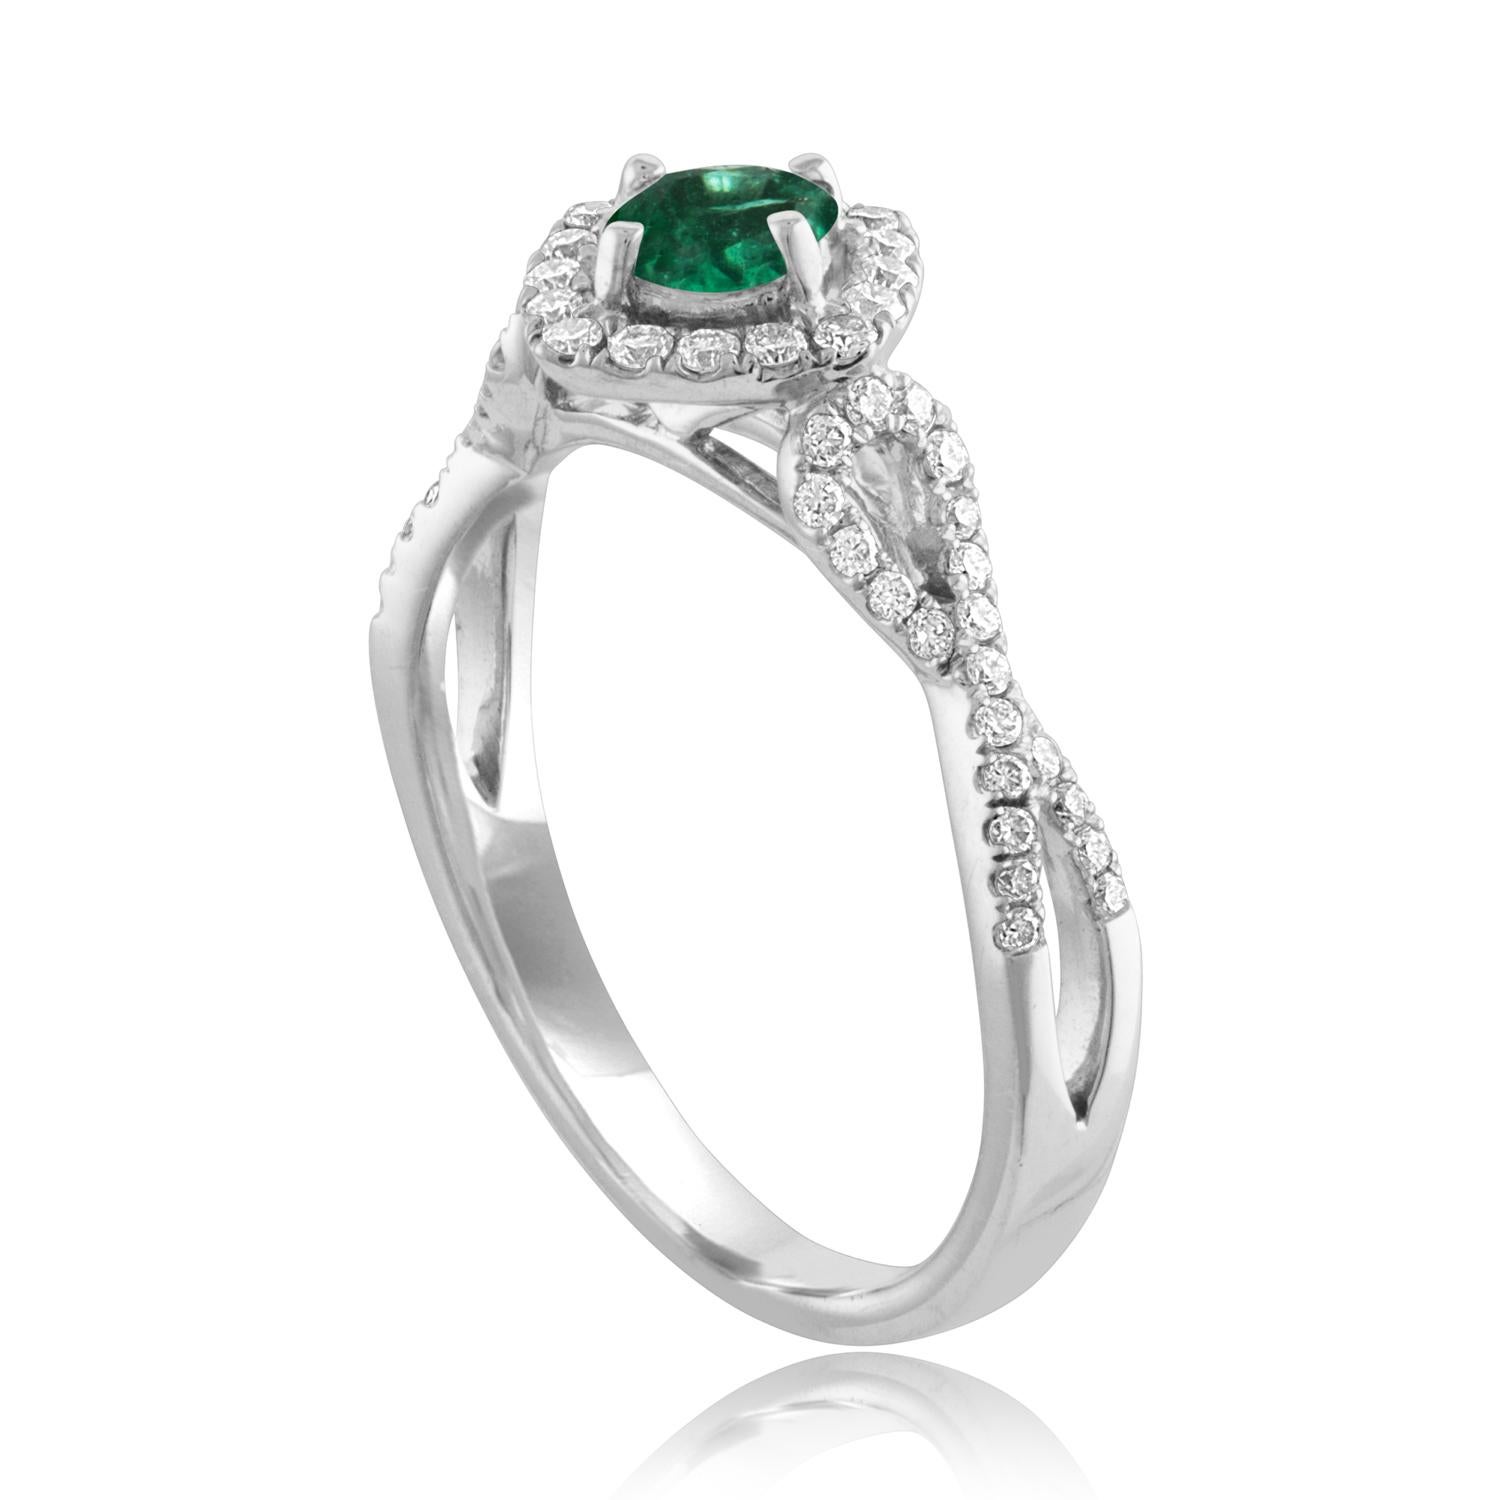 Beautiful Square Halo Criss Cross Shank Emerald Ring
The ring is 18K White Gold.
The Center is a beautiful Round cut 0.29 Carat Emerald.
The Emerald is AGL certified.
There are 0.45 Carats in Diamonds F/G VS/SI
The ring is a size 6.50, sizable.
The